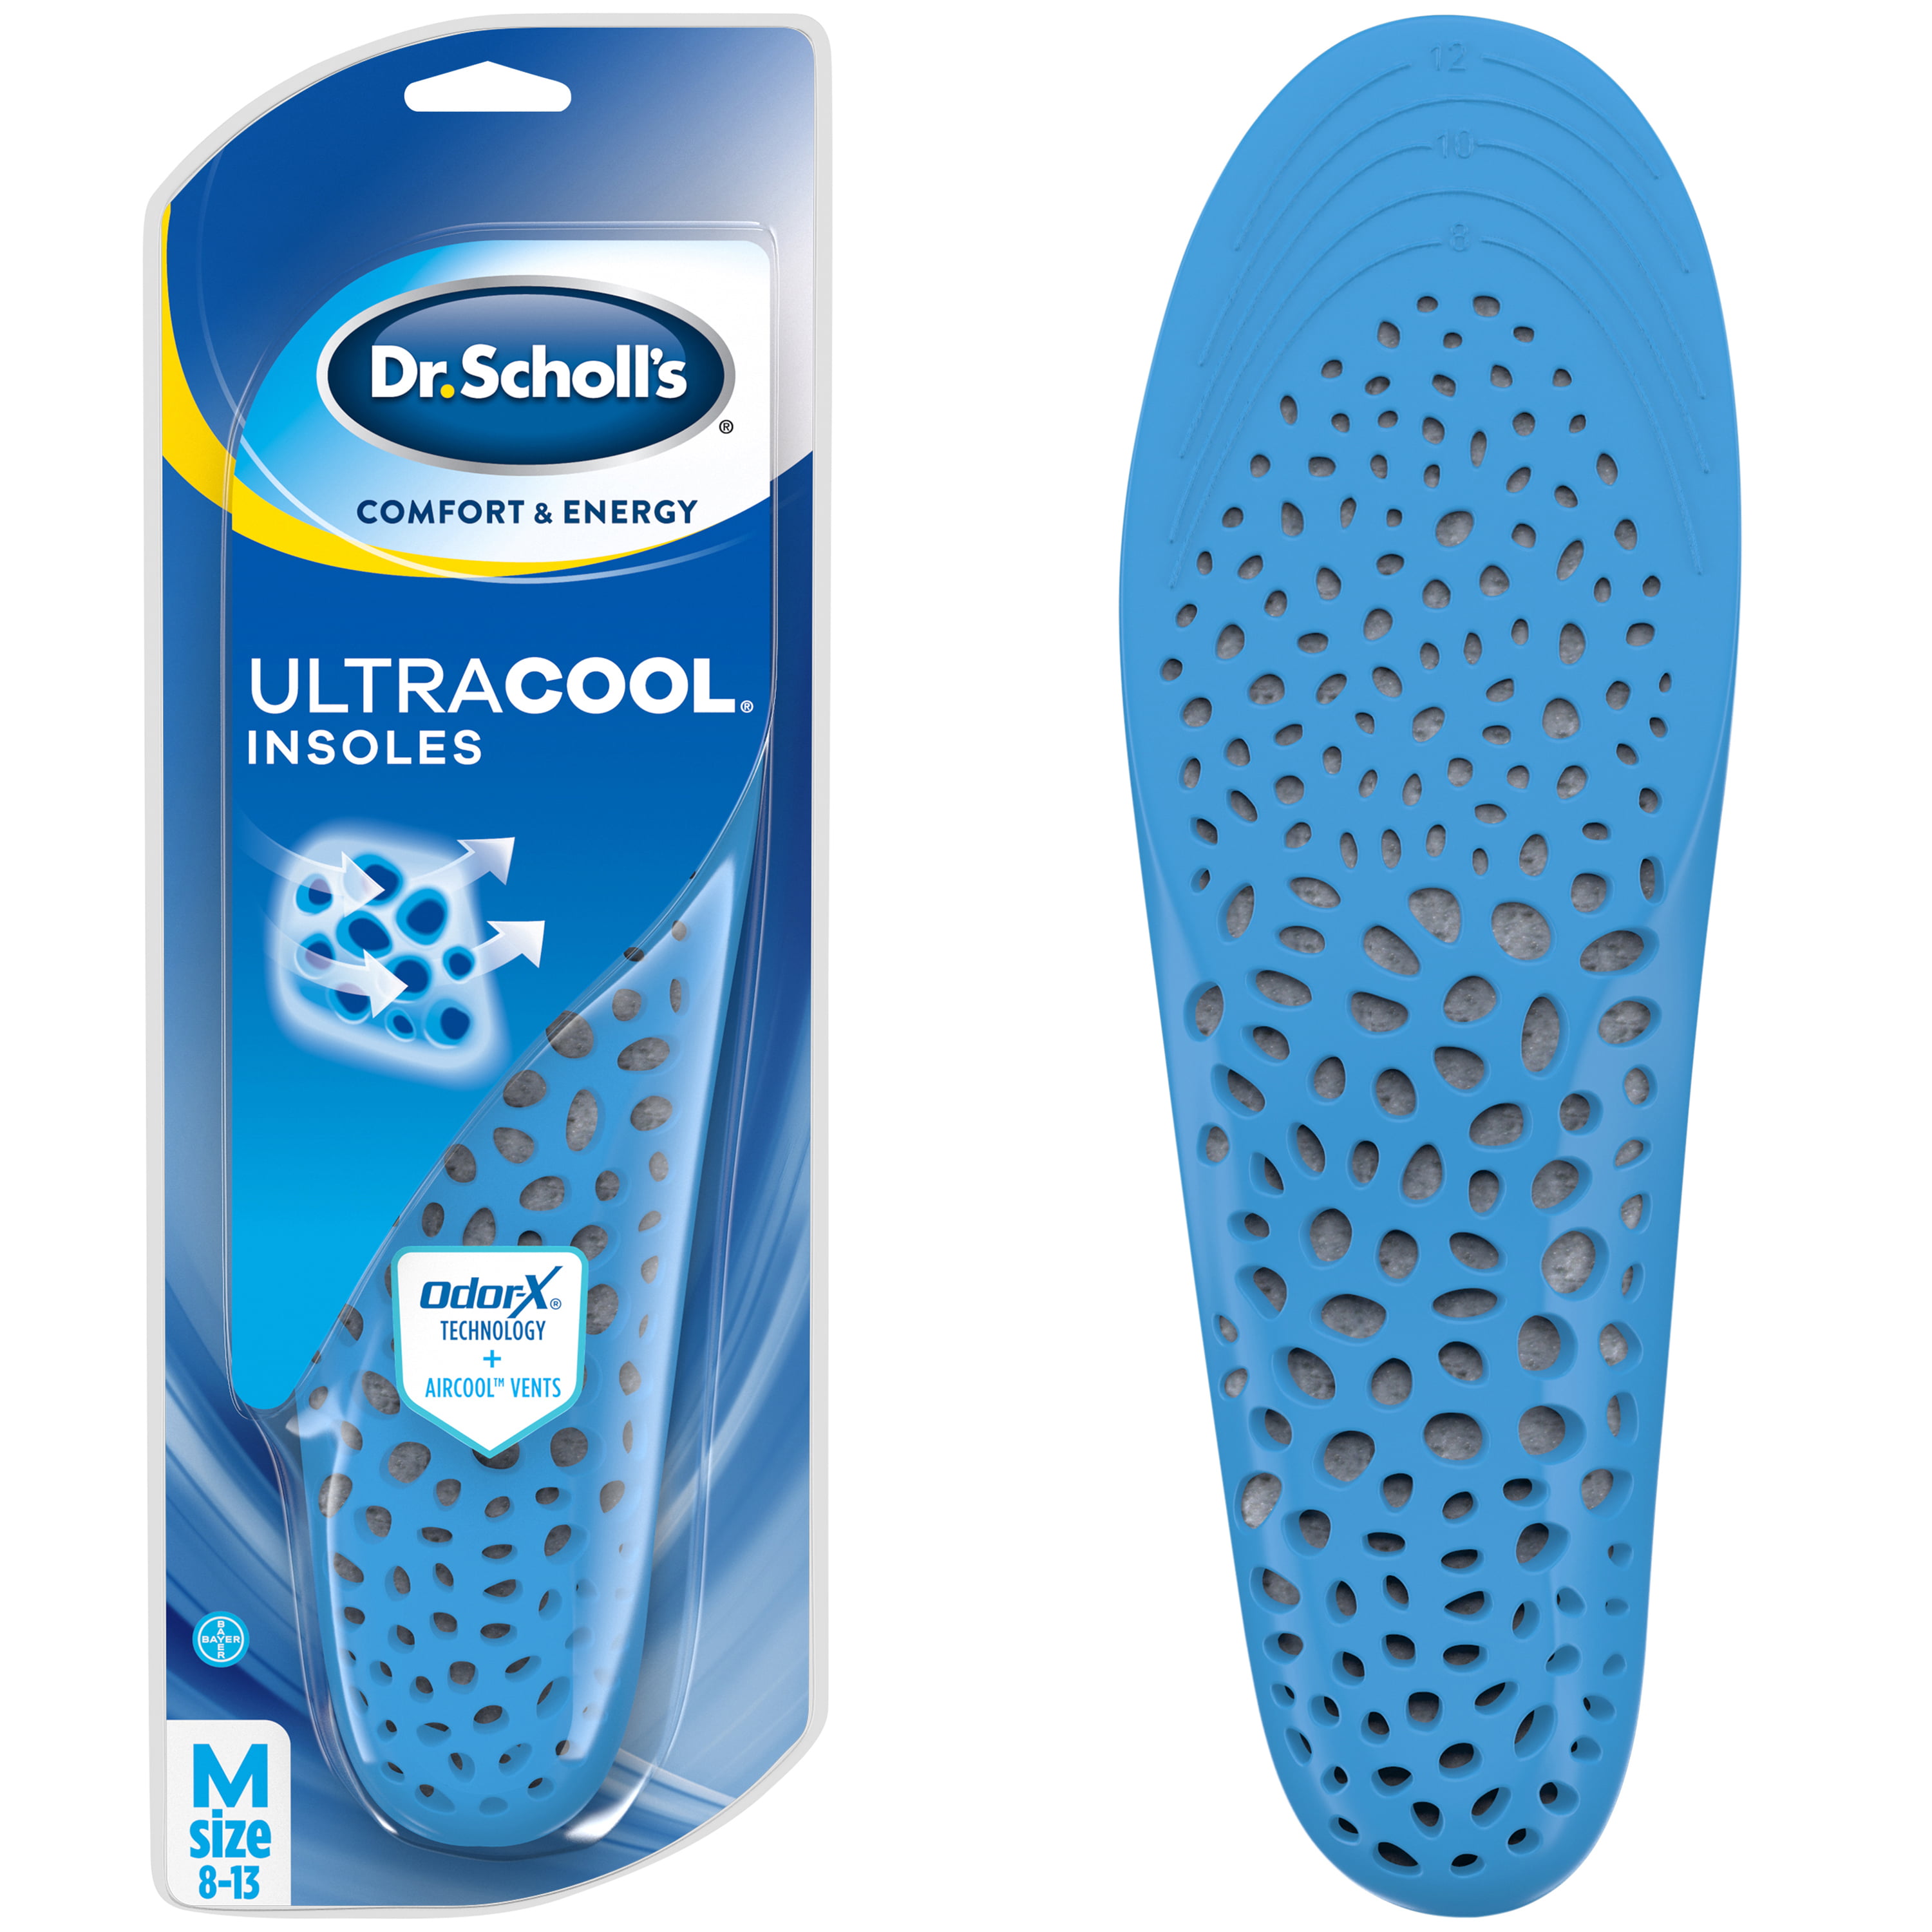 dr scholl's comfort and energy